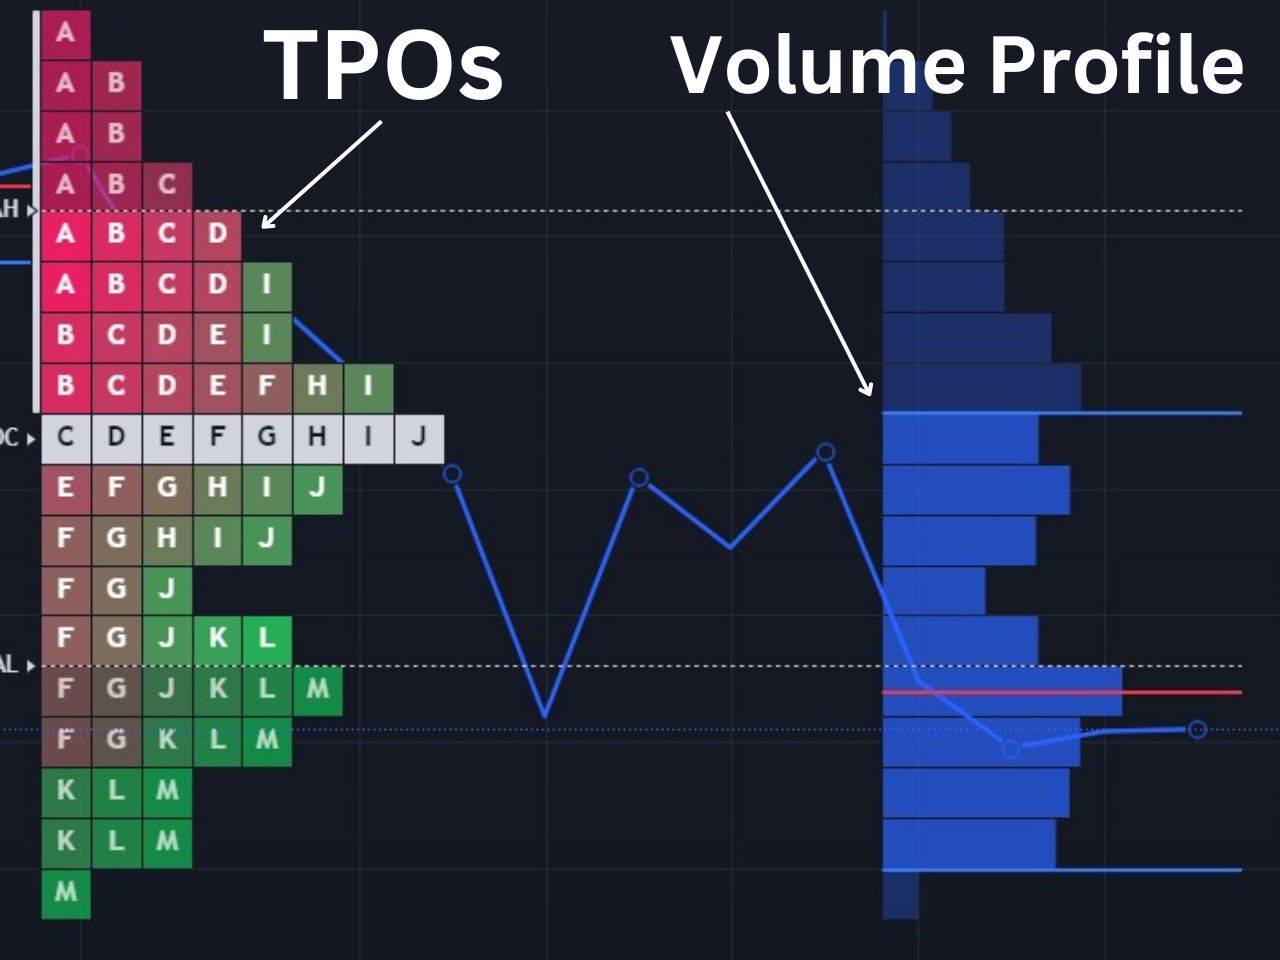 an image of TPOs and volume profile on TradingView